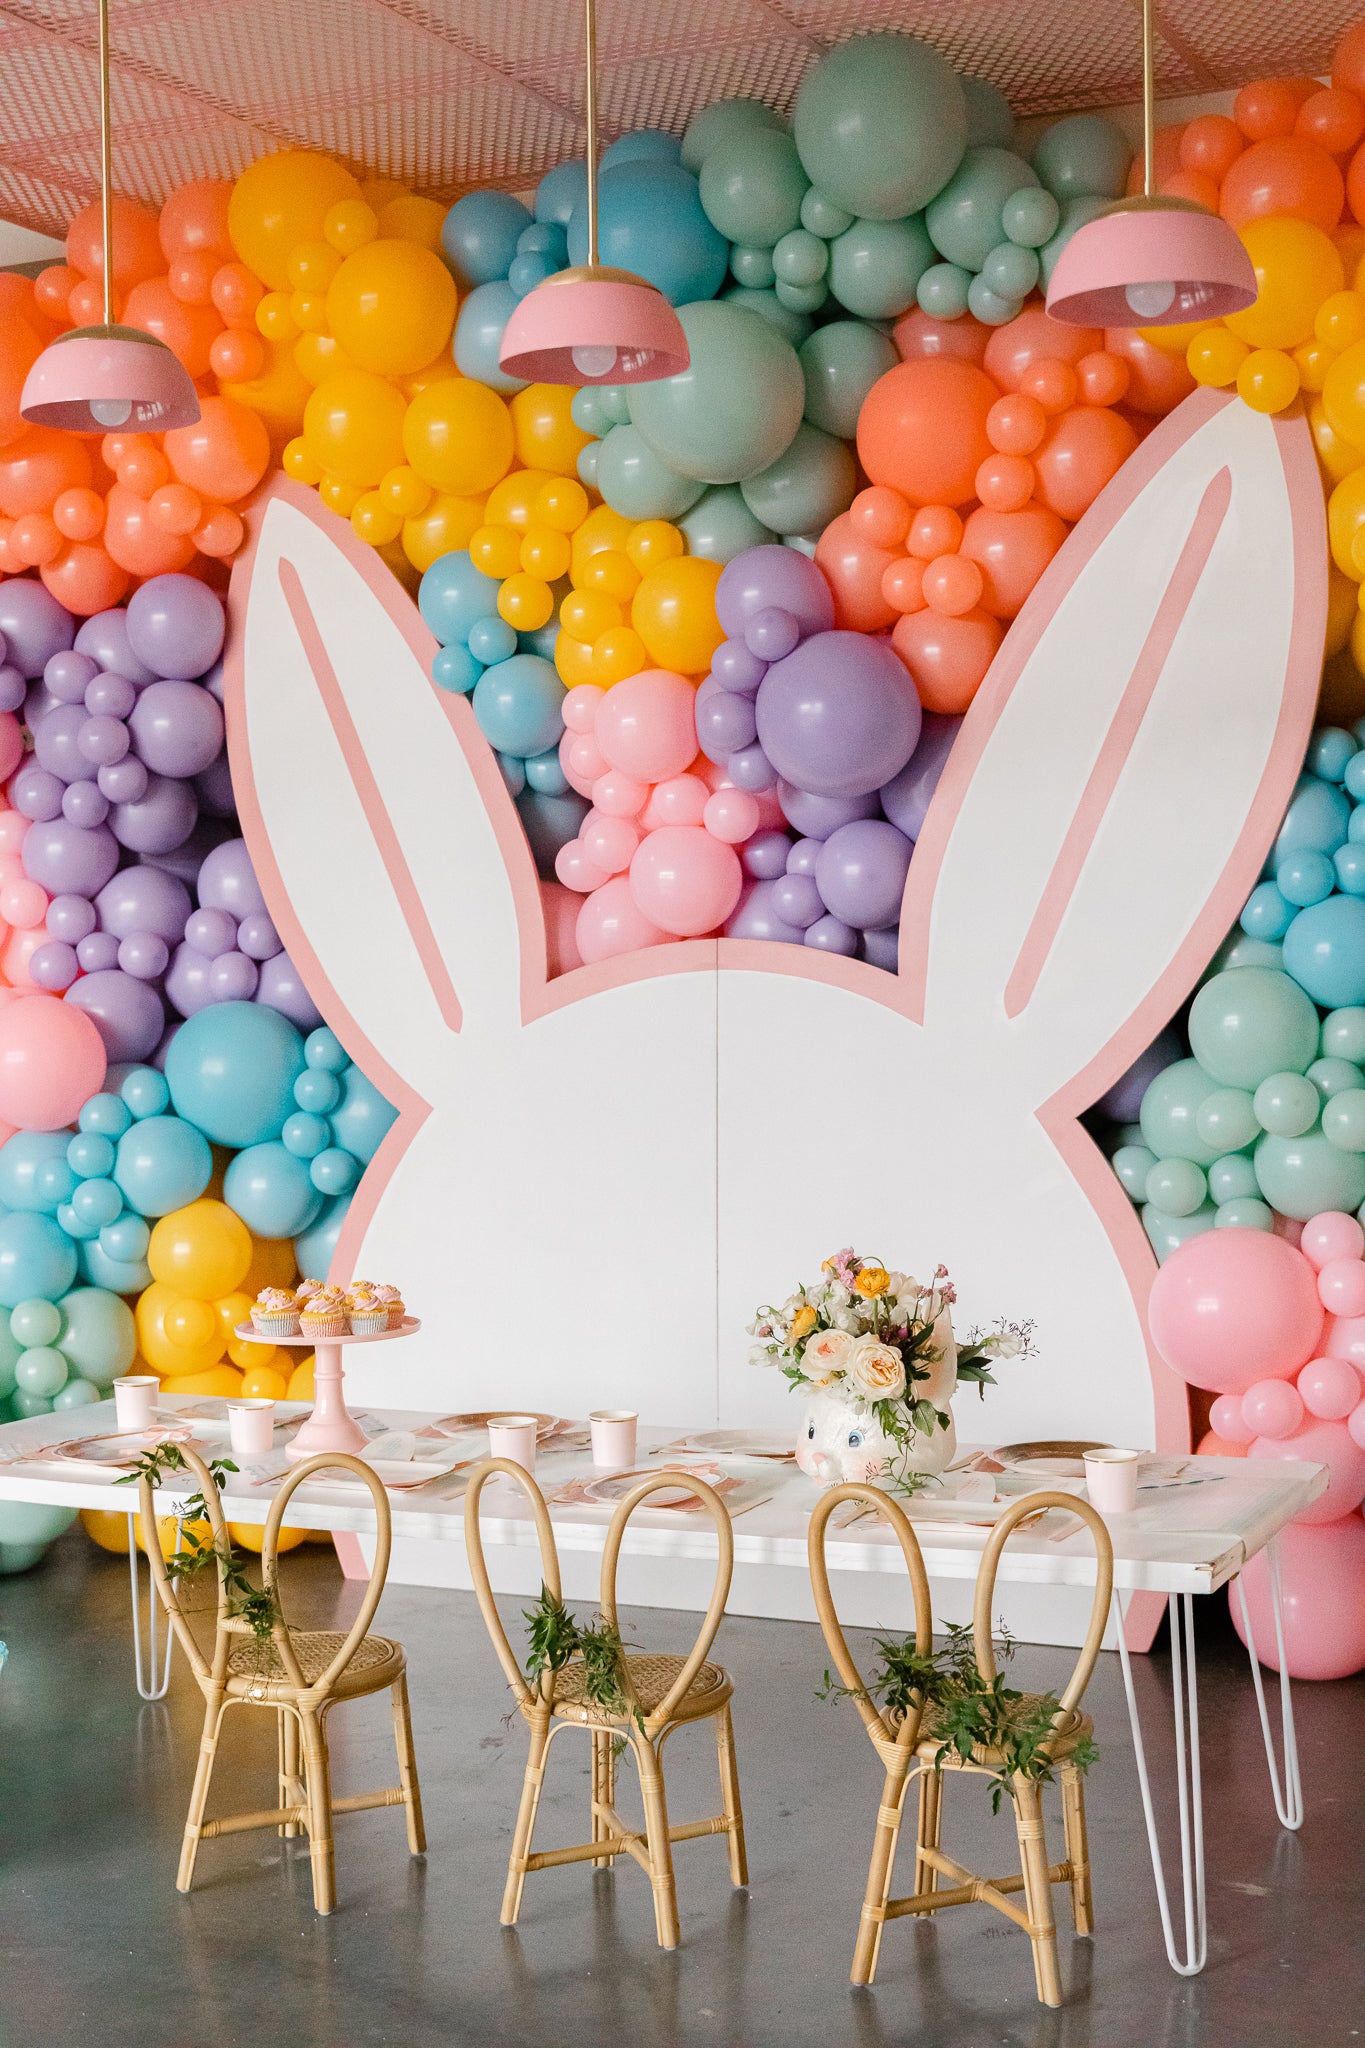 Easter party decoration ideas for kids.